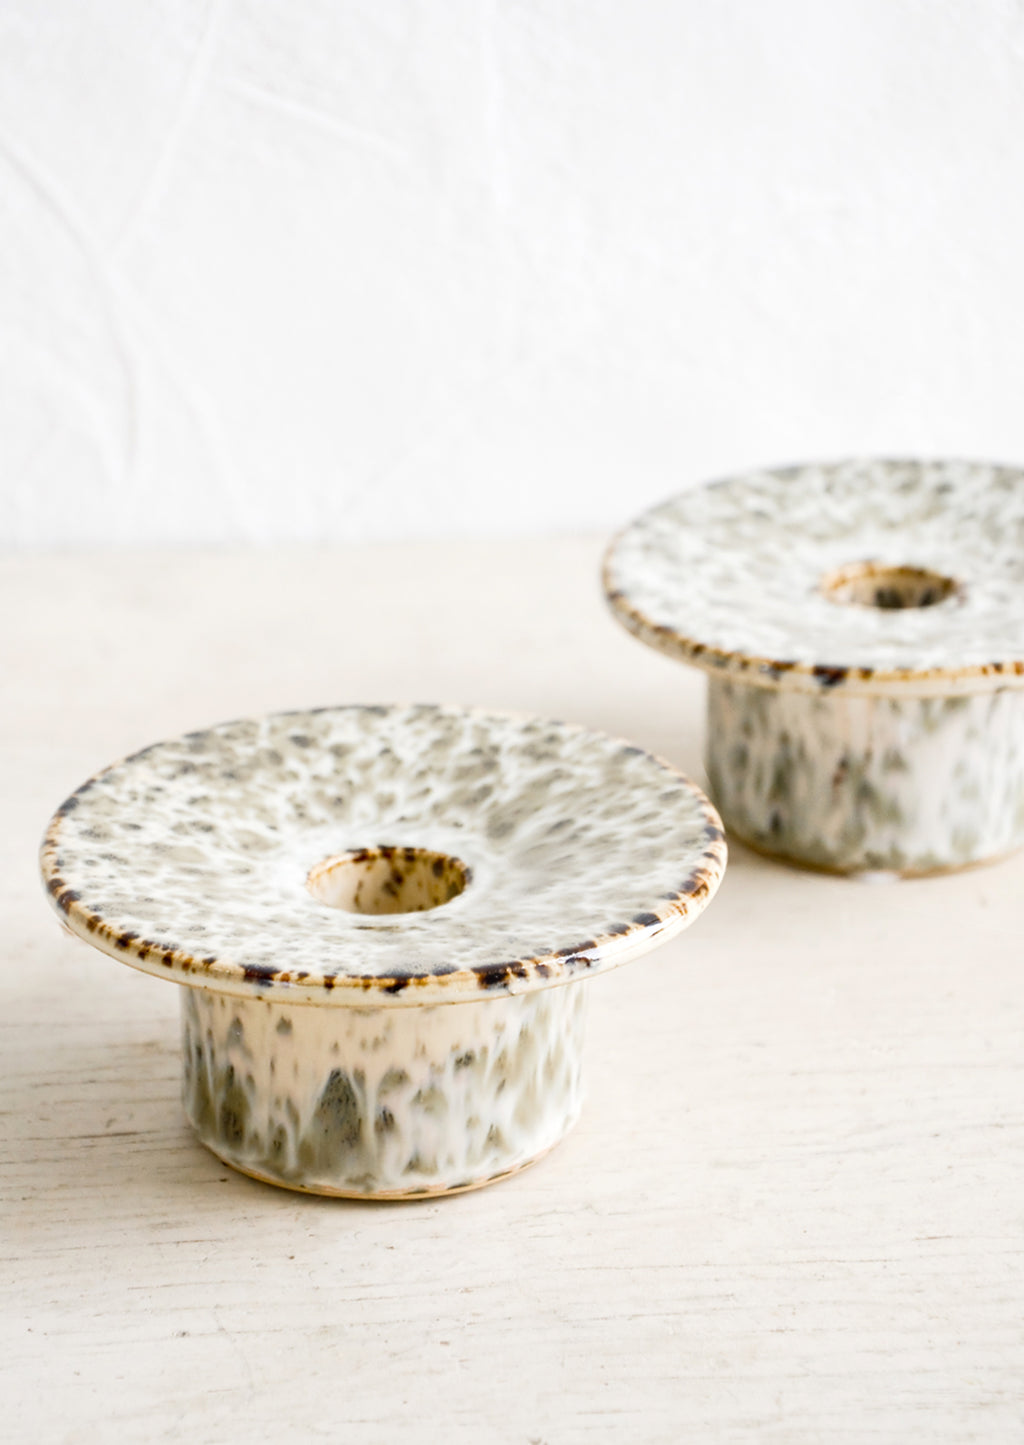 1: Short ceramic taper candle holders with saucer-like top in speckled reactive glaze